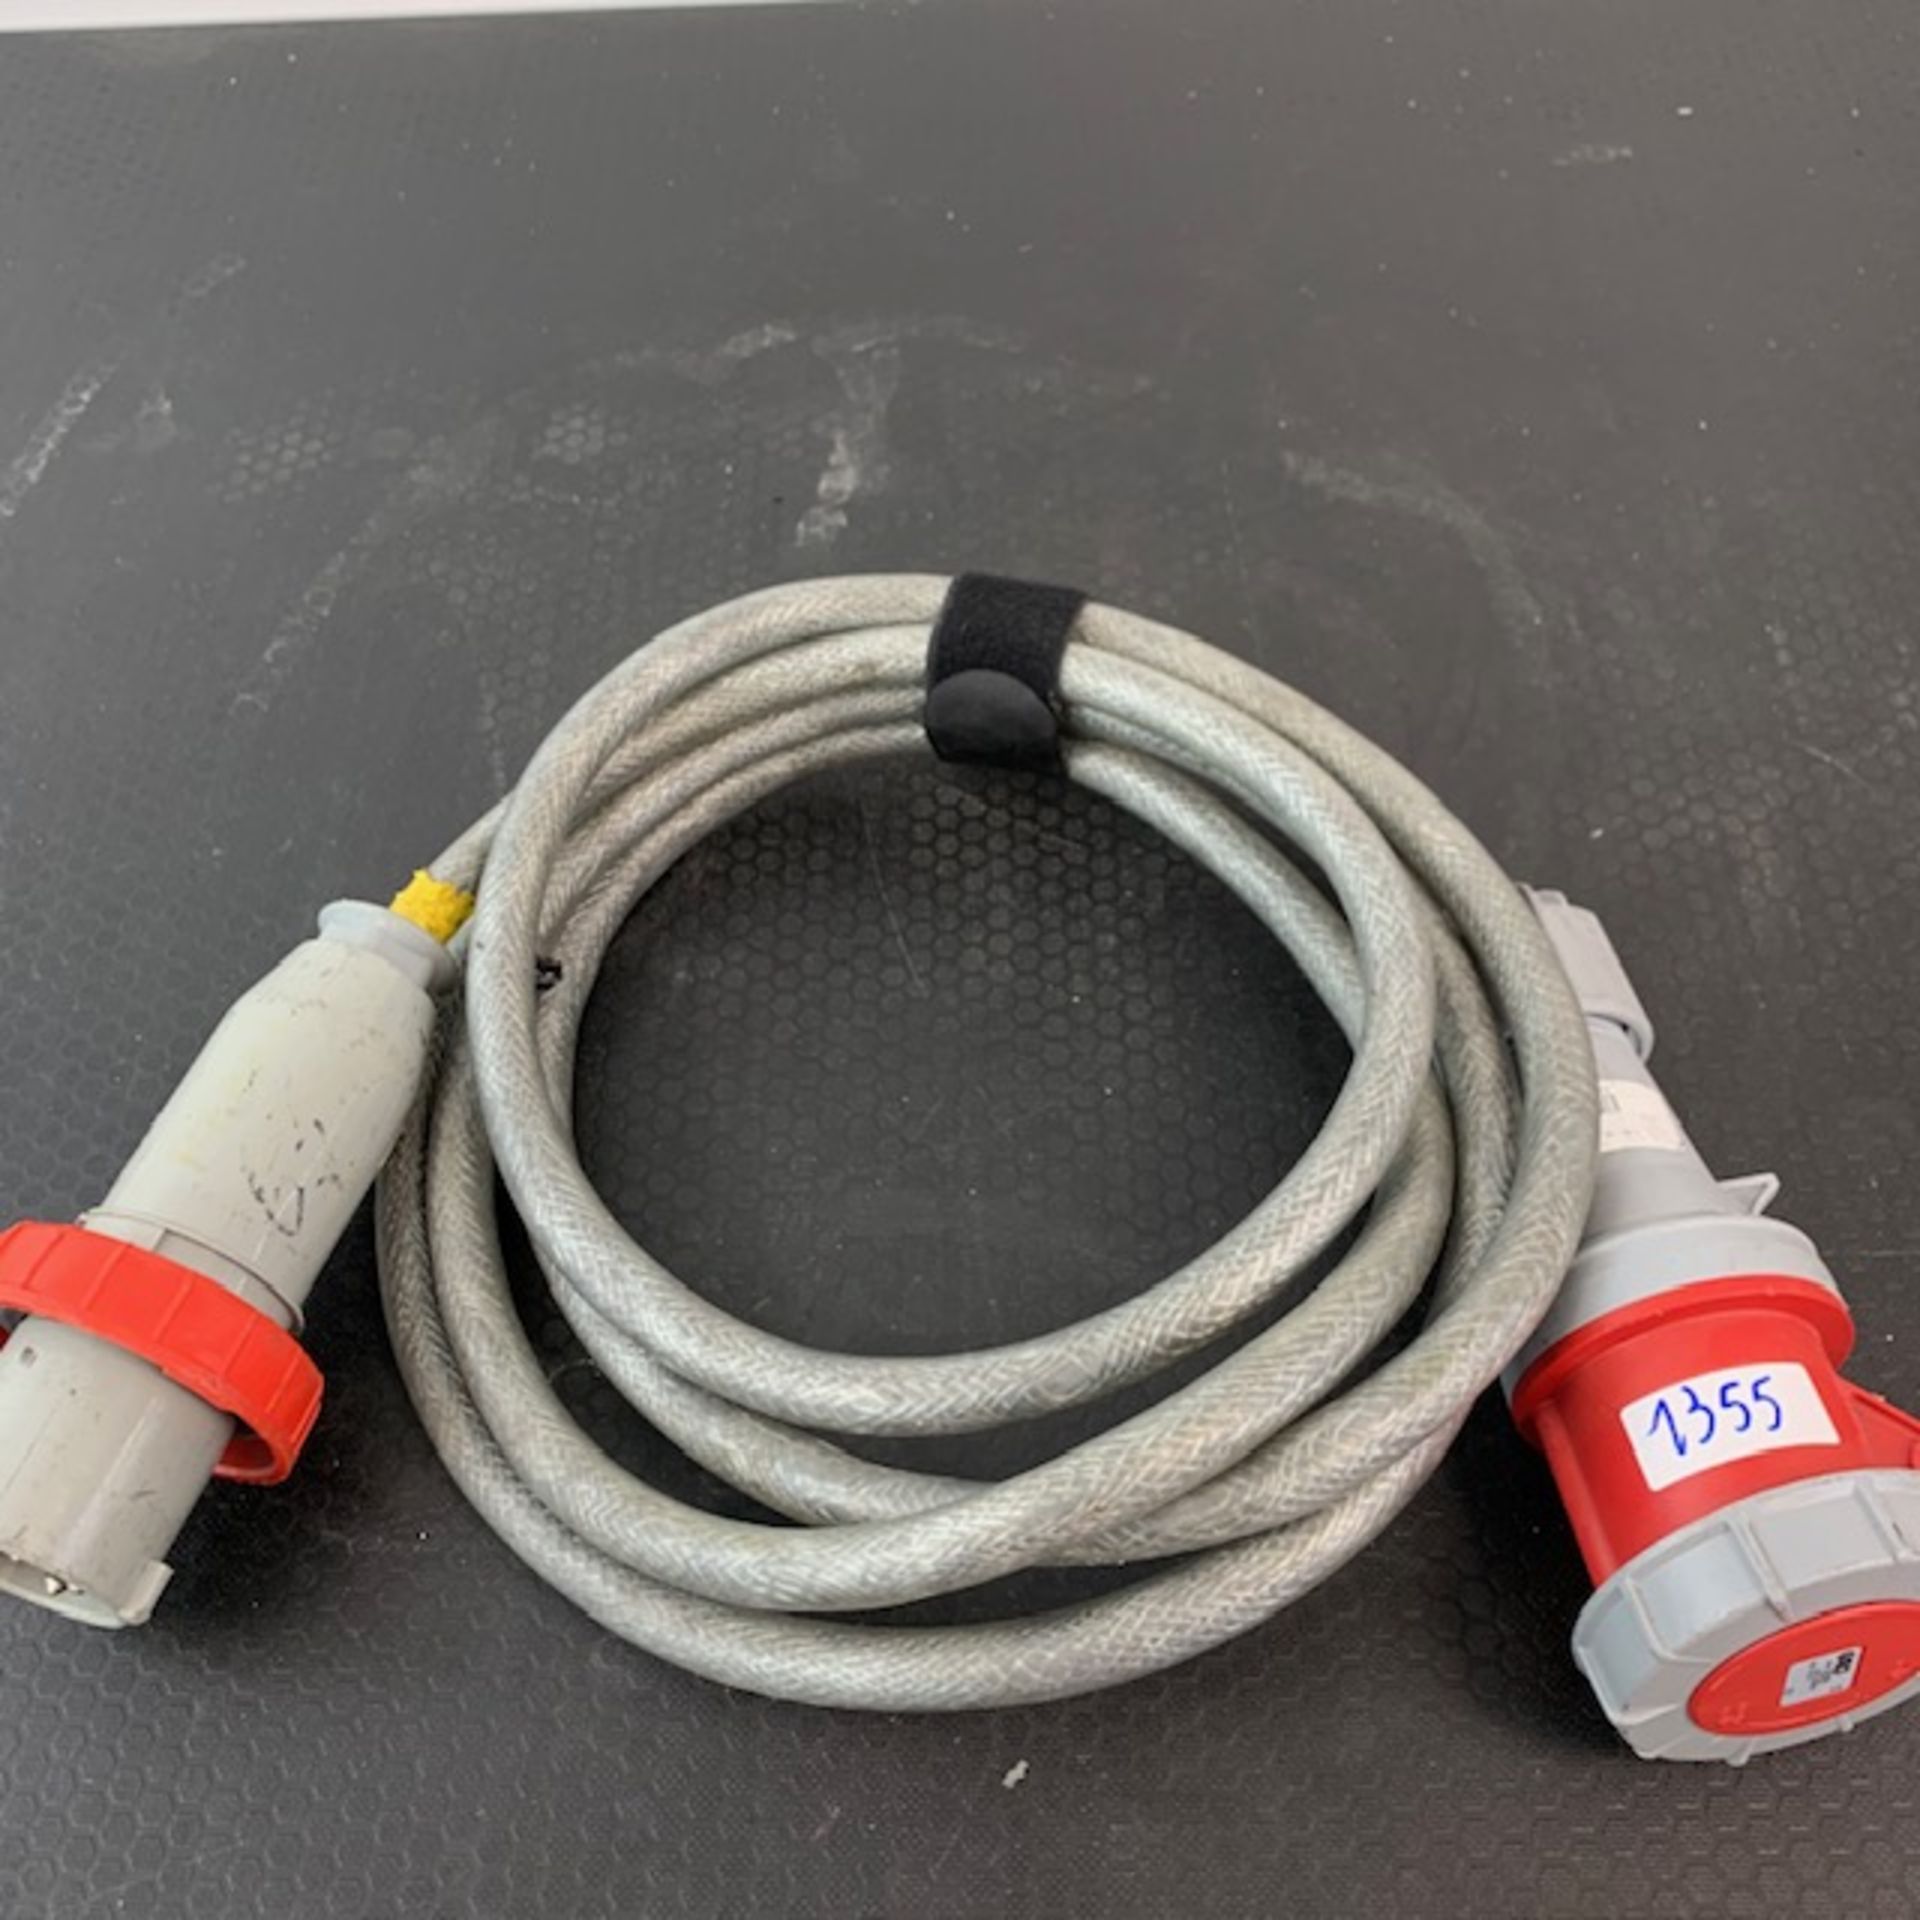 1 X 63Amp 3 Phase 5M Reinforced Cable - Ref: 1355 - CL581 - Location: Altrincham Wa14